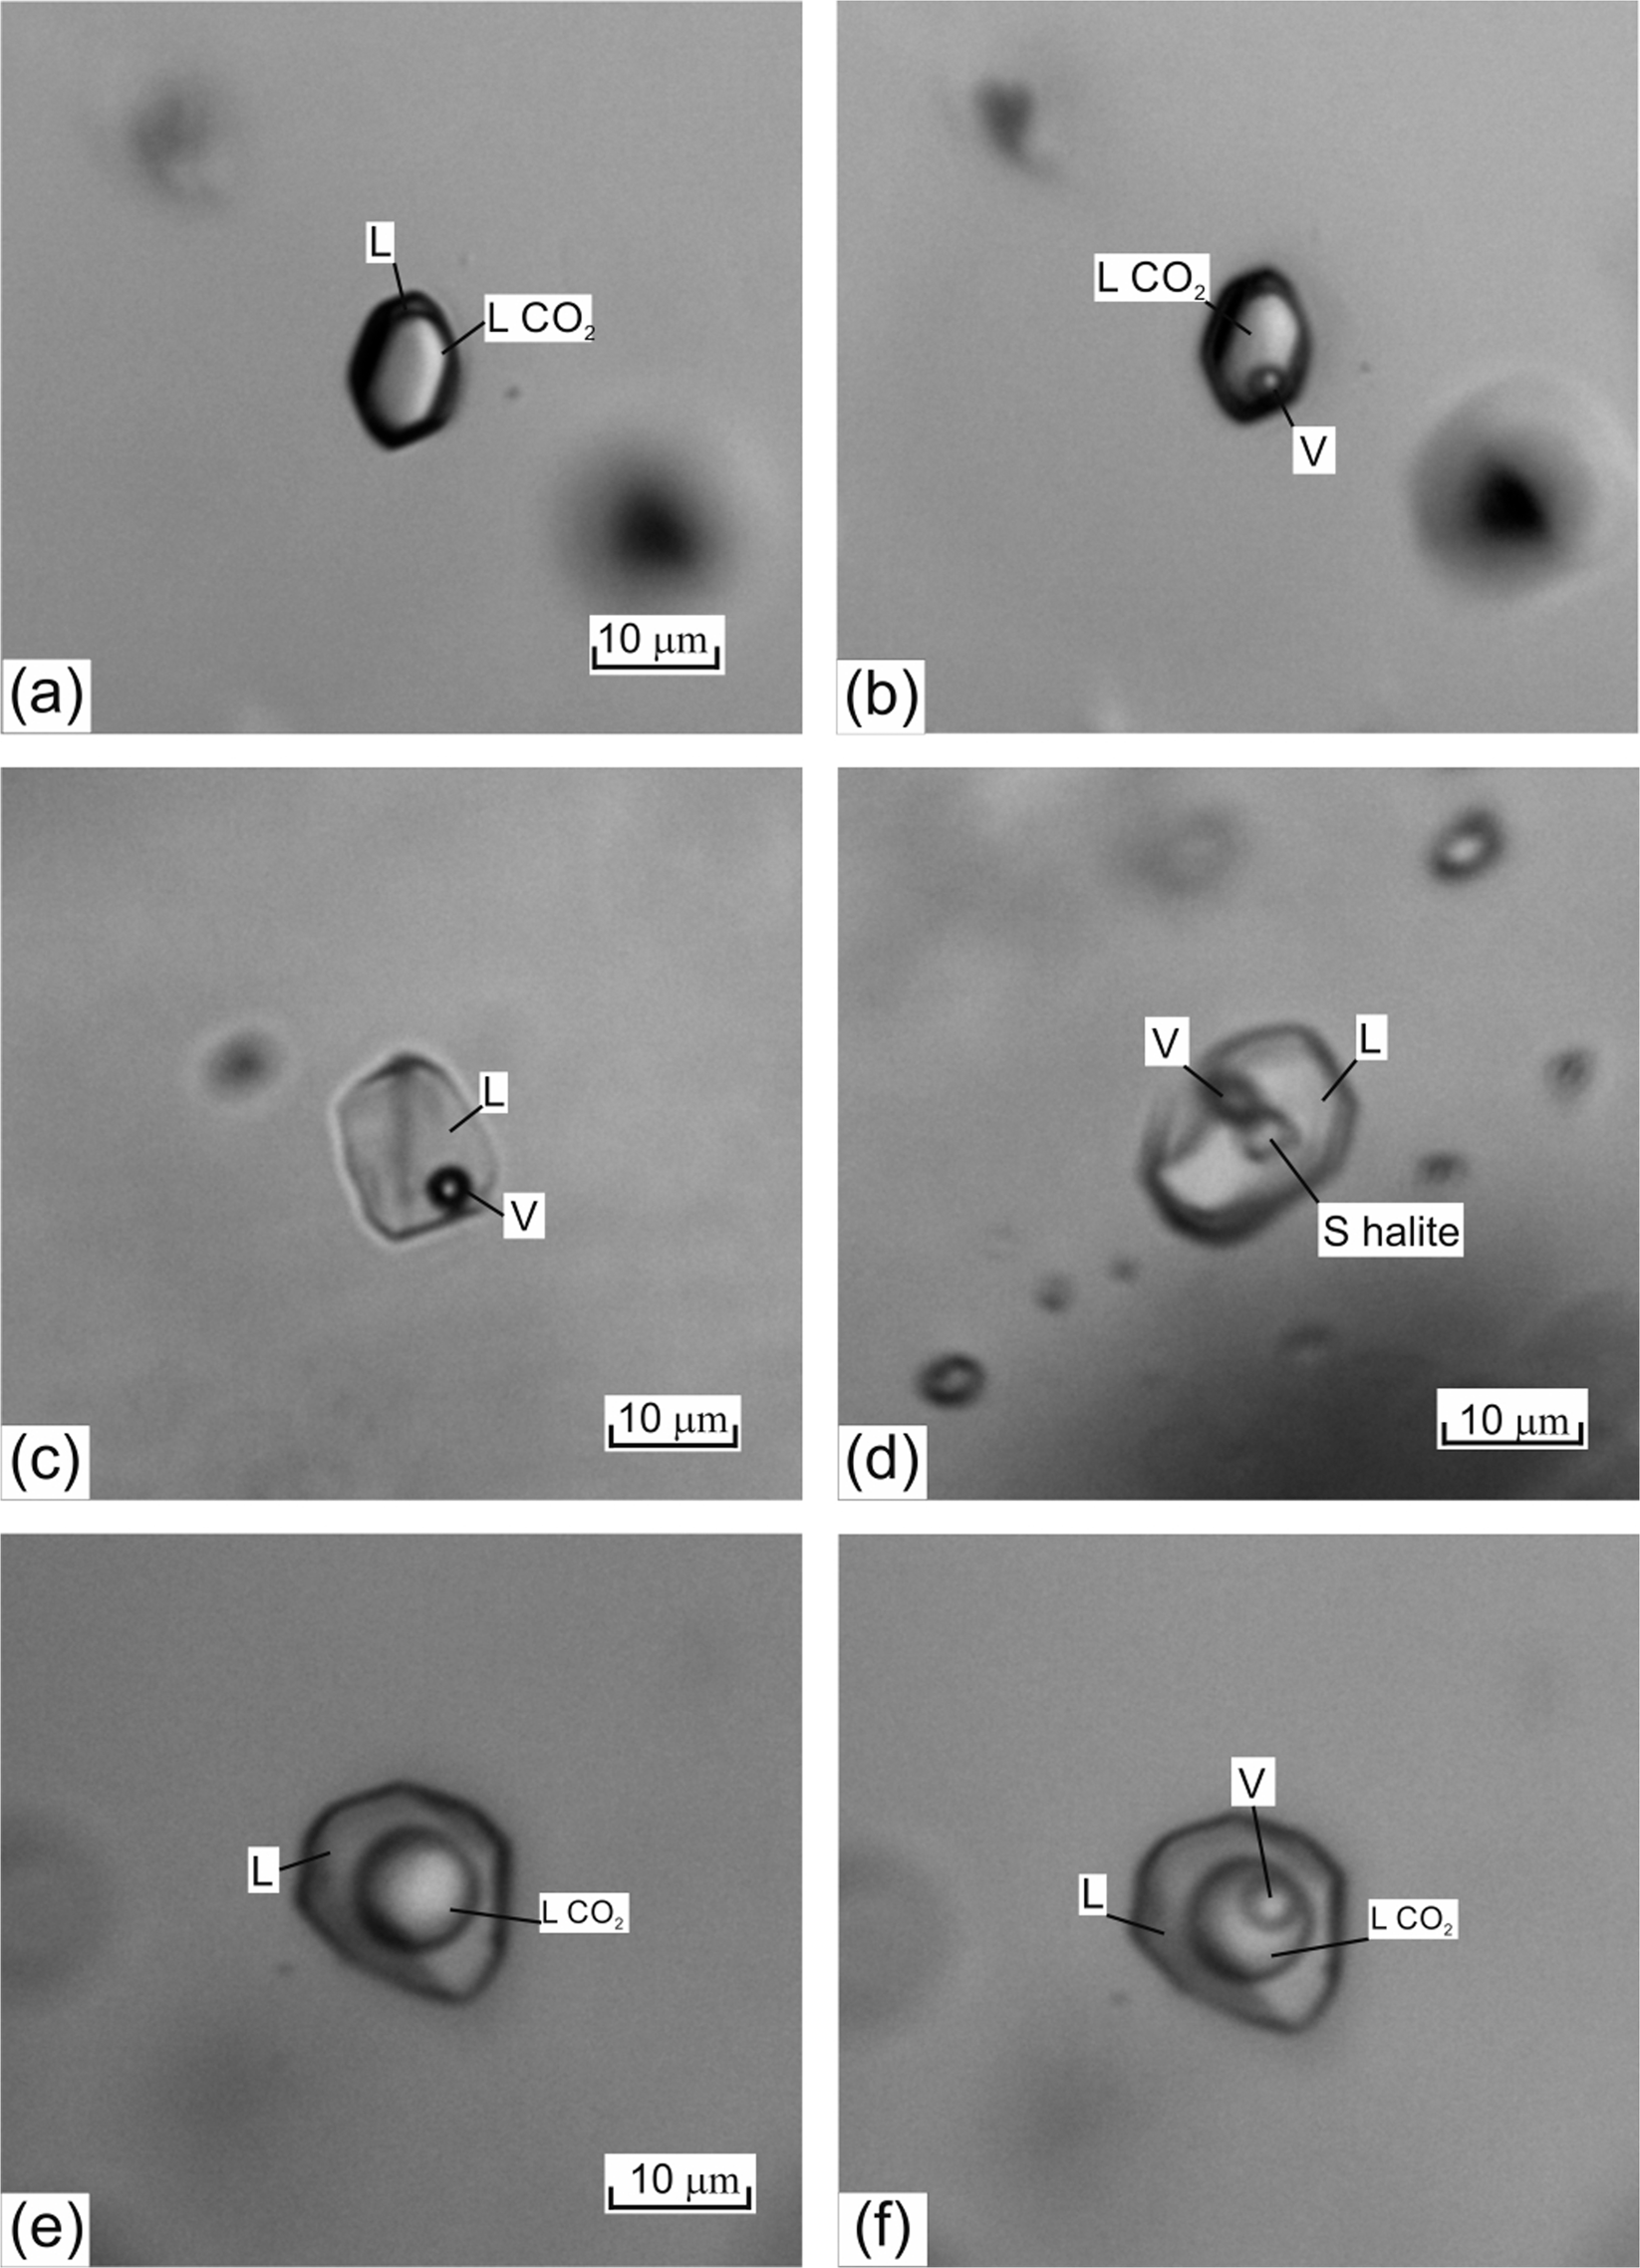 Exceptional Concentrations of Gold Nanoparticles in 1,7 Ga Fluid Inclusions  From the Kola Superdeep Borehole, Northwest Russia | Scientific Reports